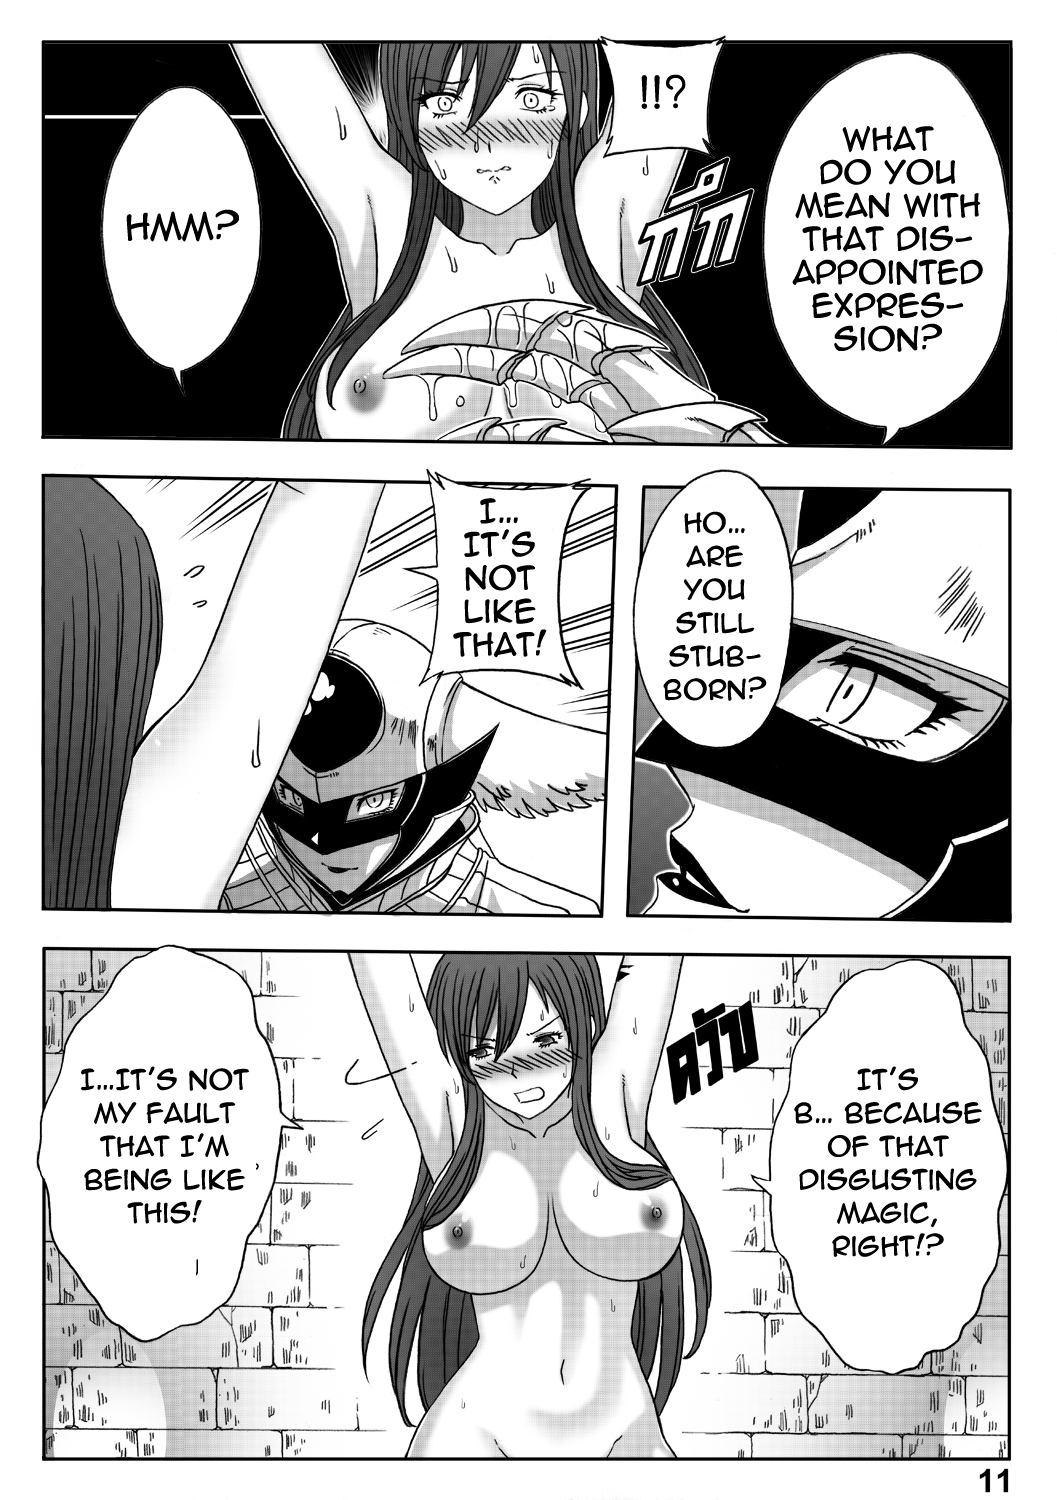 [Xter] Fairy Tail 365.5.1 The End of Titania (Fairy Tail) [English] {Dragoonlord} 